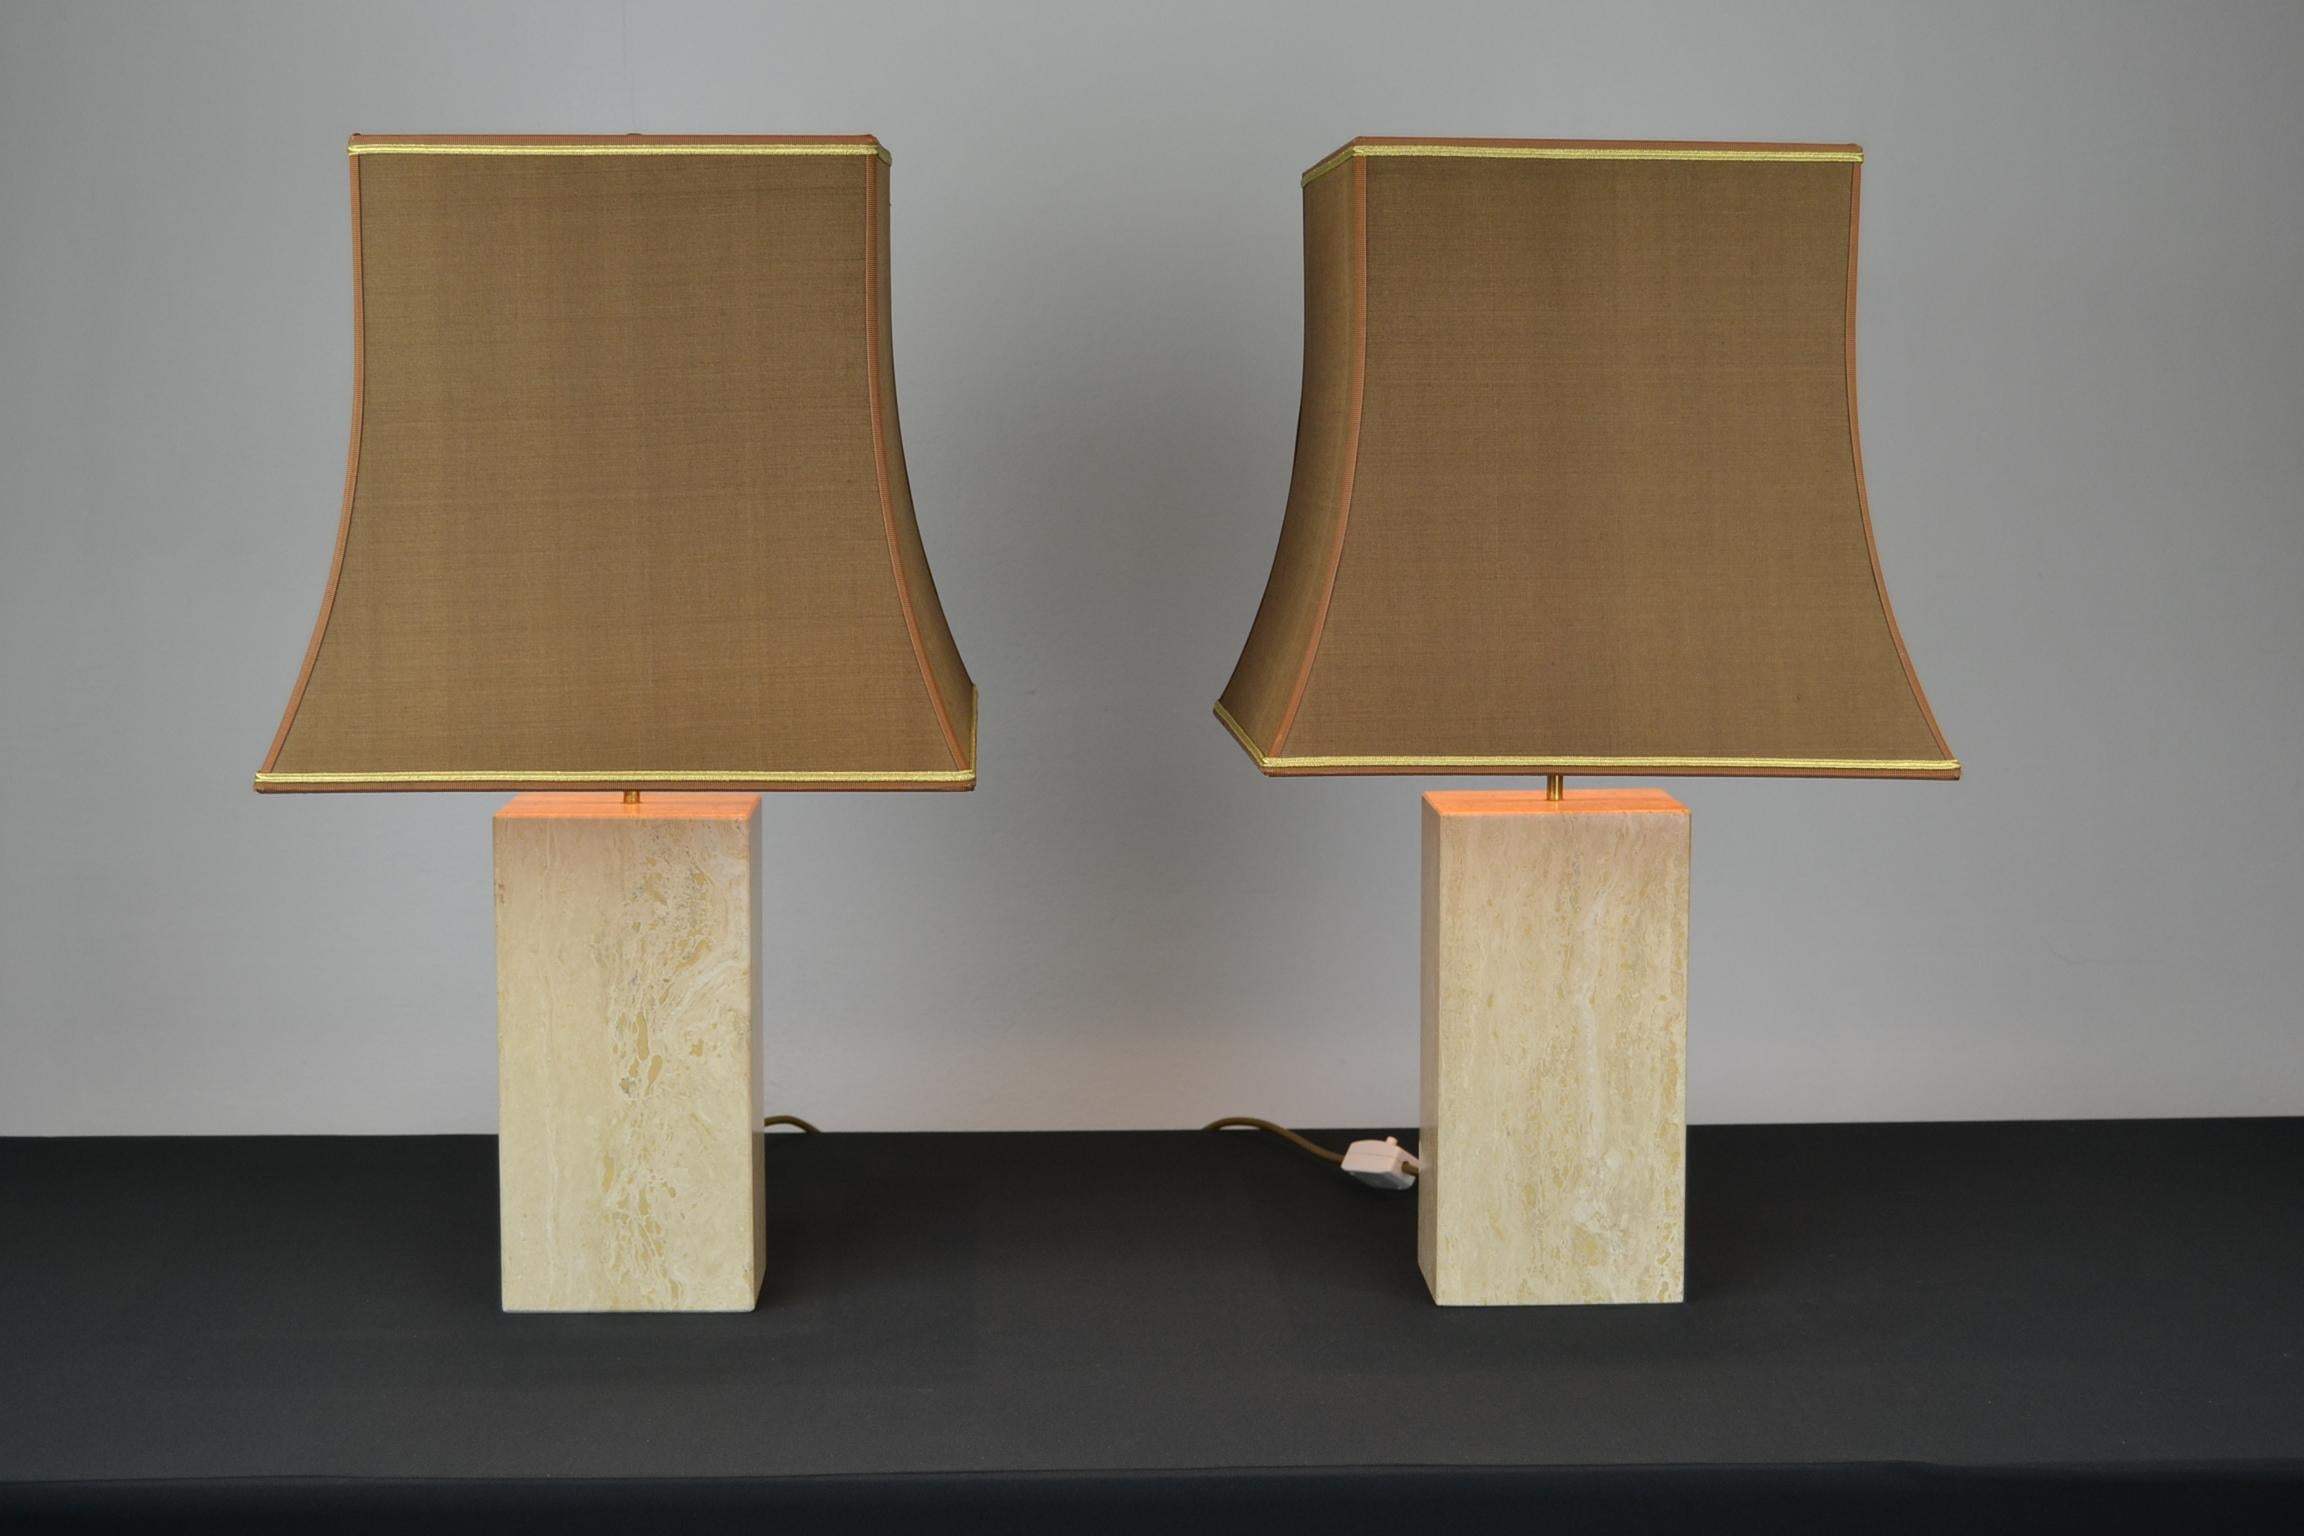 Impressive pair of travertine table lamps from the 1970s.
These square columned table lamps both have their handmade brown shades with gold edging and gold color inside what reflects the light. They have each 2 bulbs which are connected by brass to